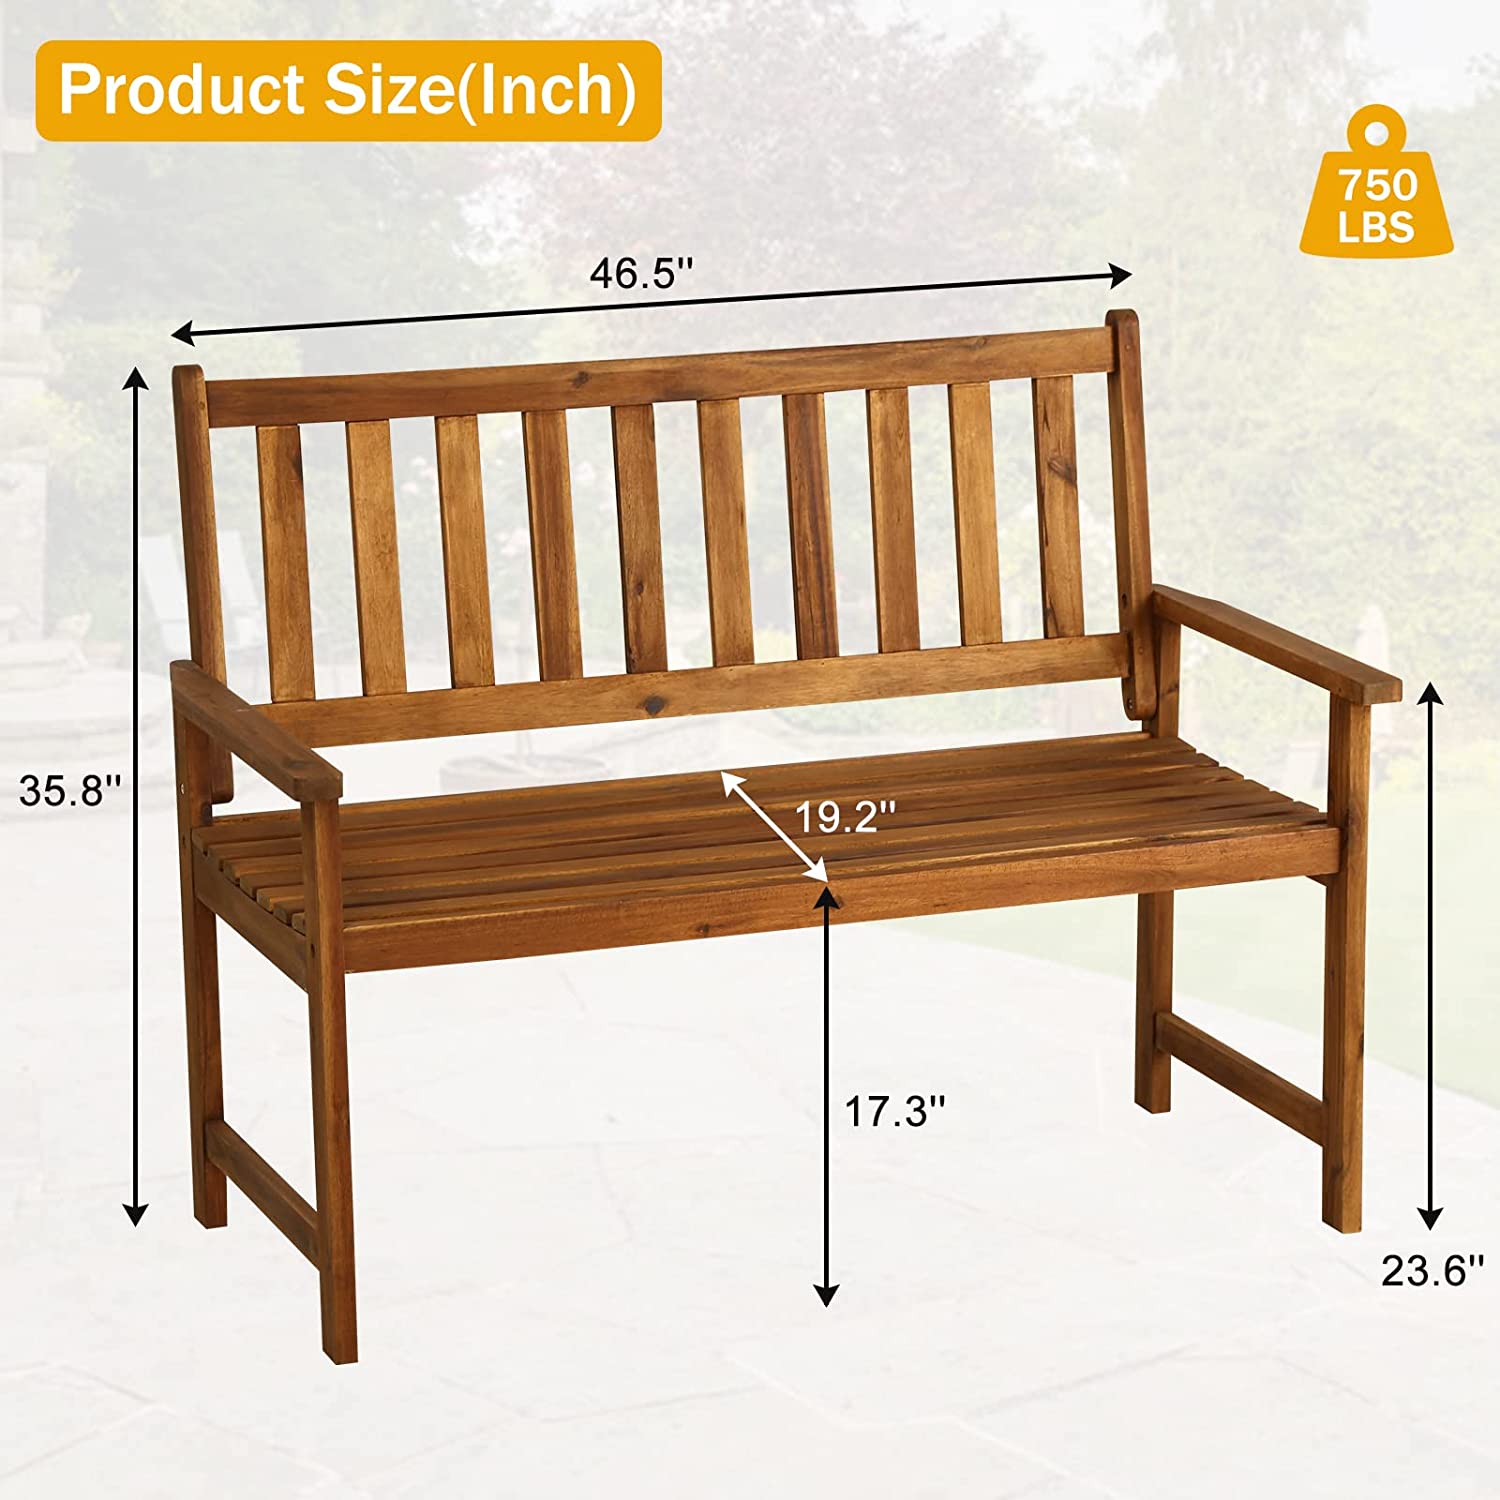 Outdoor Bench Front Porch Bench Garden  Bench Outdoor Wood Bench with Armrests, 2 Person Seat Outdoor  Porch Chair for Garden Porch Park Balcony Backyard,Natural Oiled - image 3 of 7